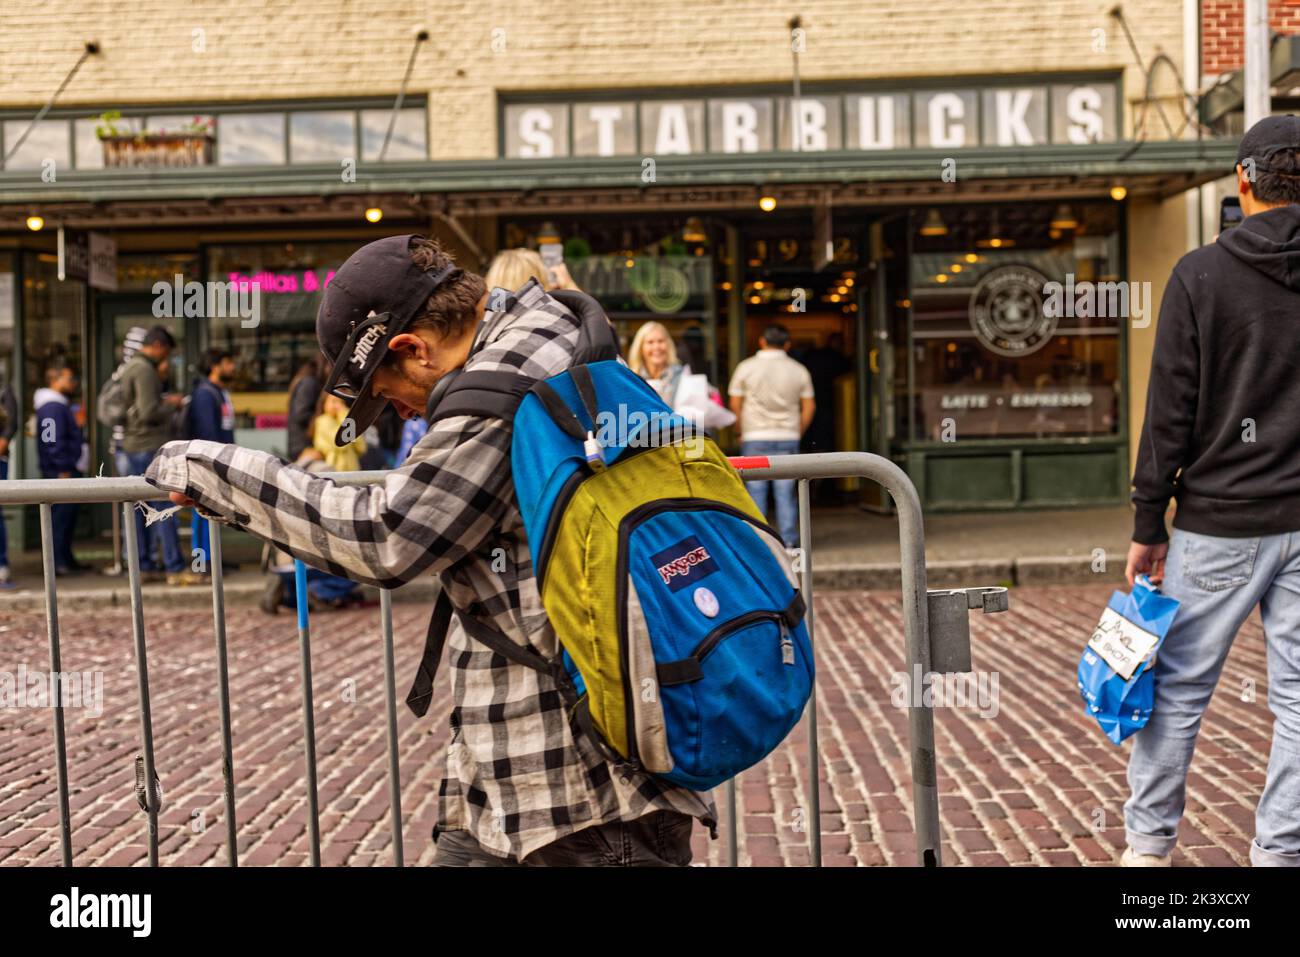 A Junky man wearing backpack and catching a fence in Seattle Street Stock Photo